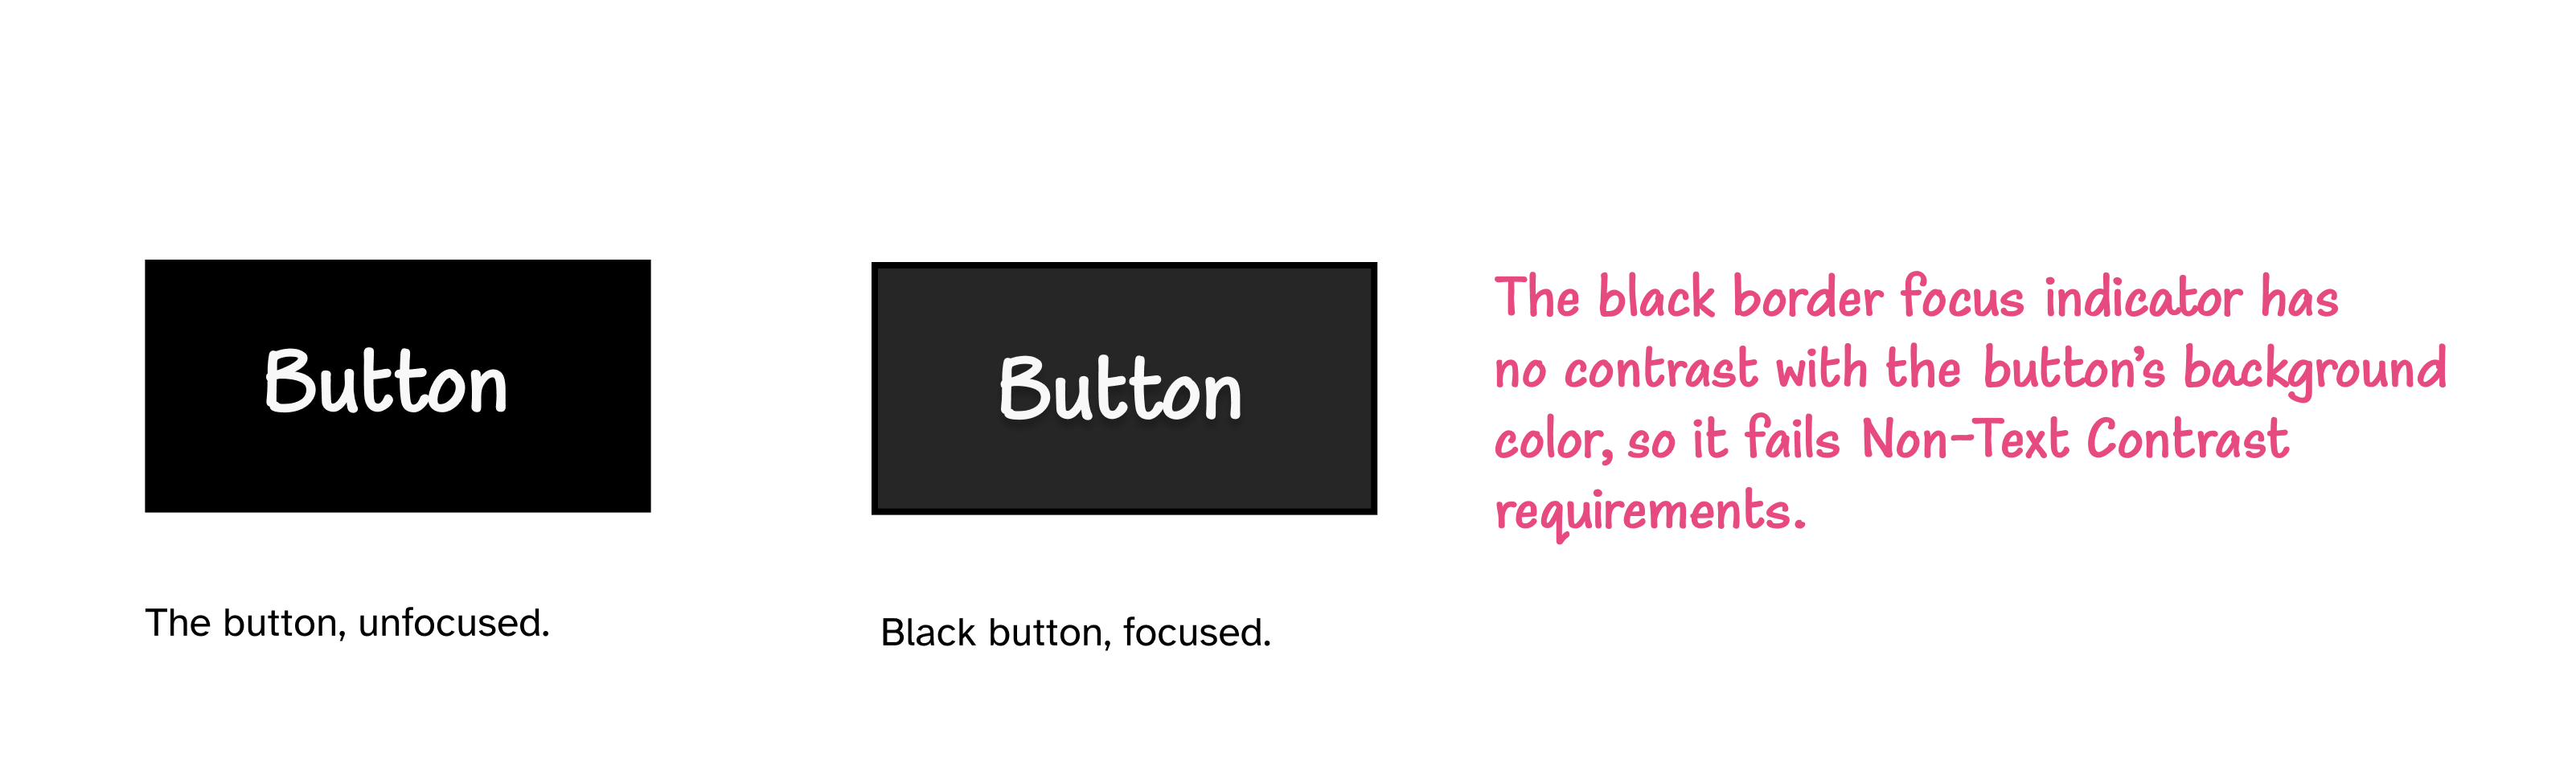 Two black buttons set on a white background. In the focused state, one of the buttons has a black border as the focus indicator.